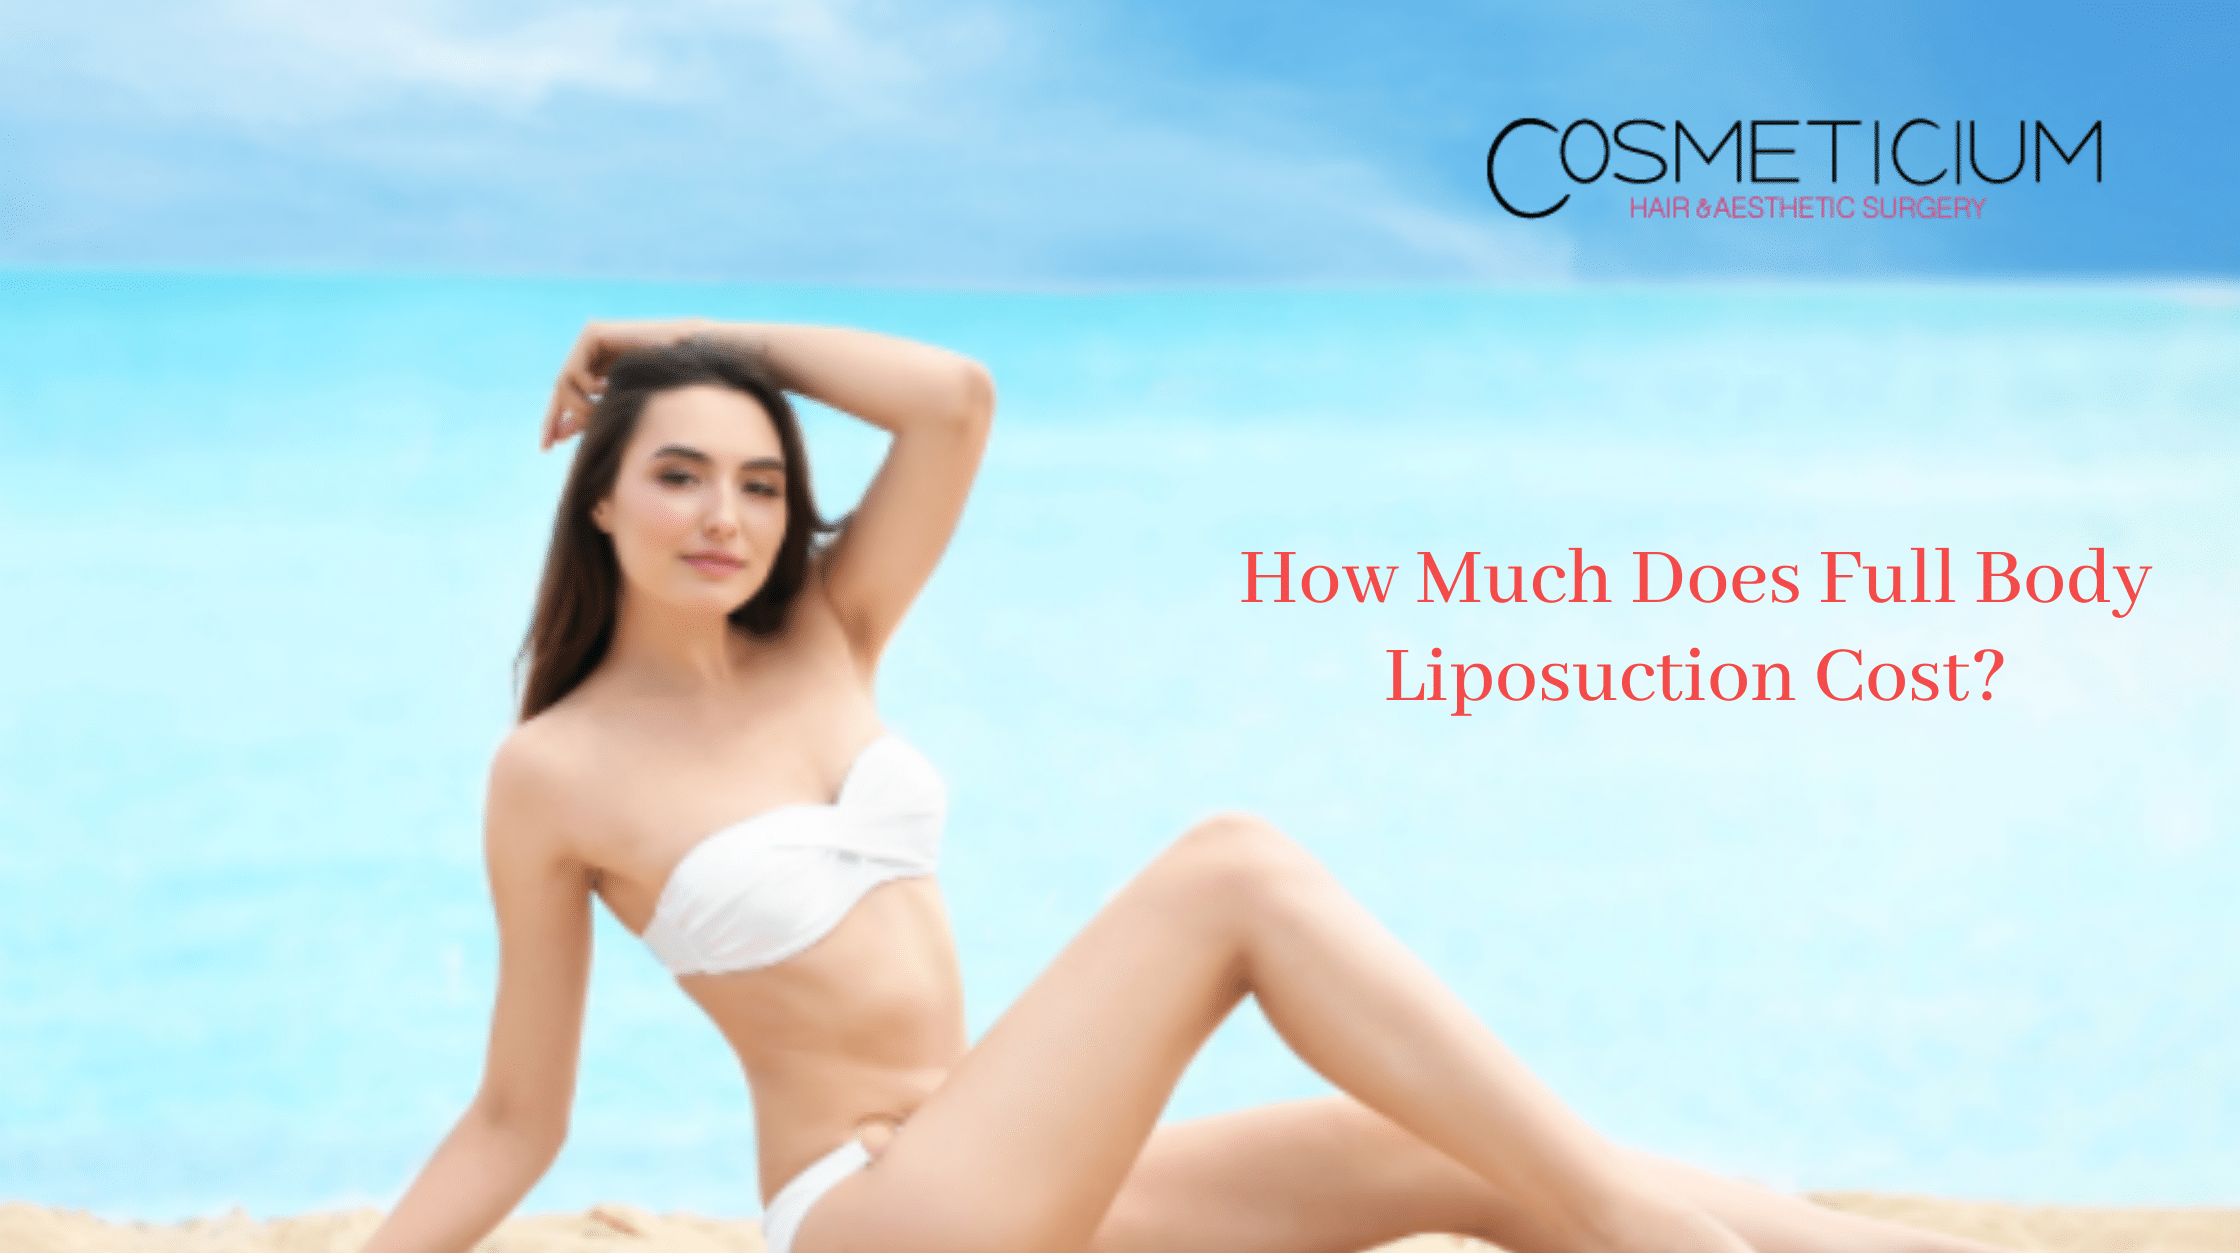 How Much Does Full Body Liposuction Cost?